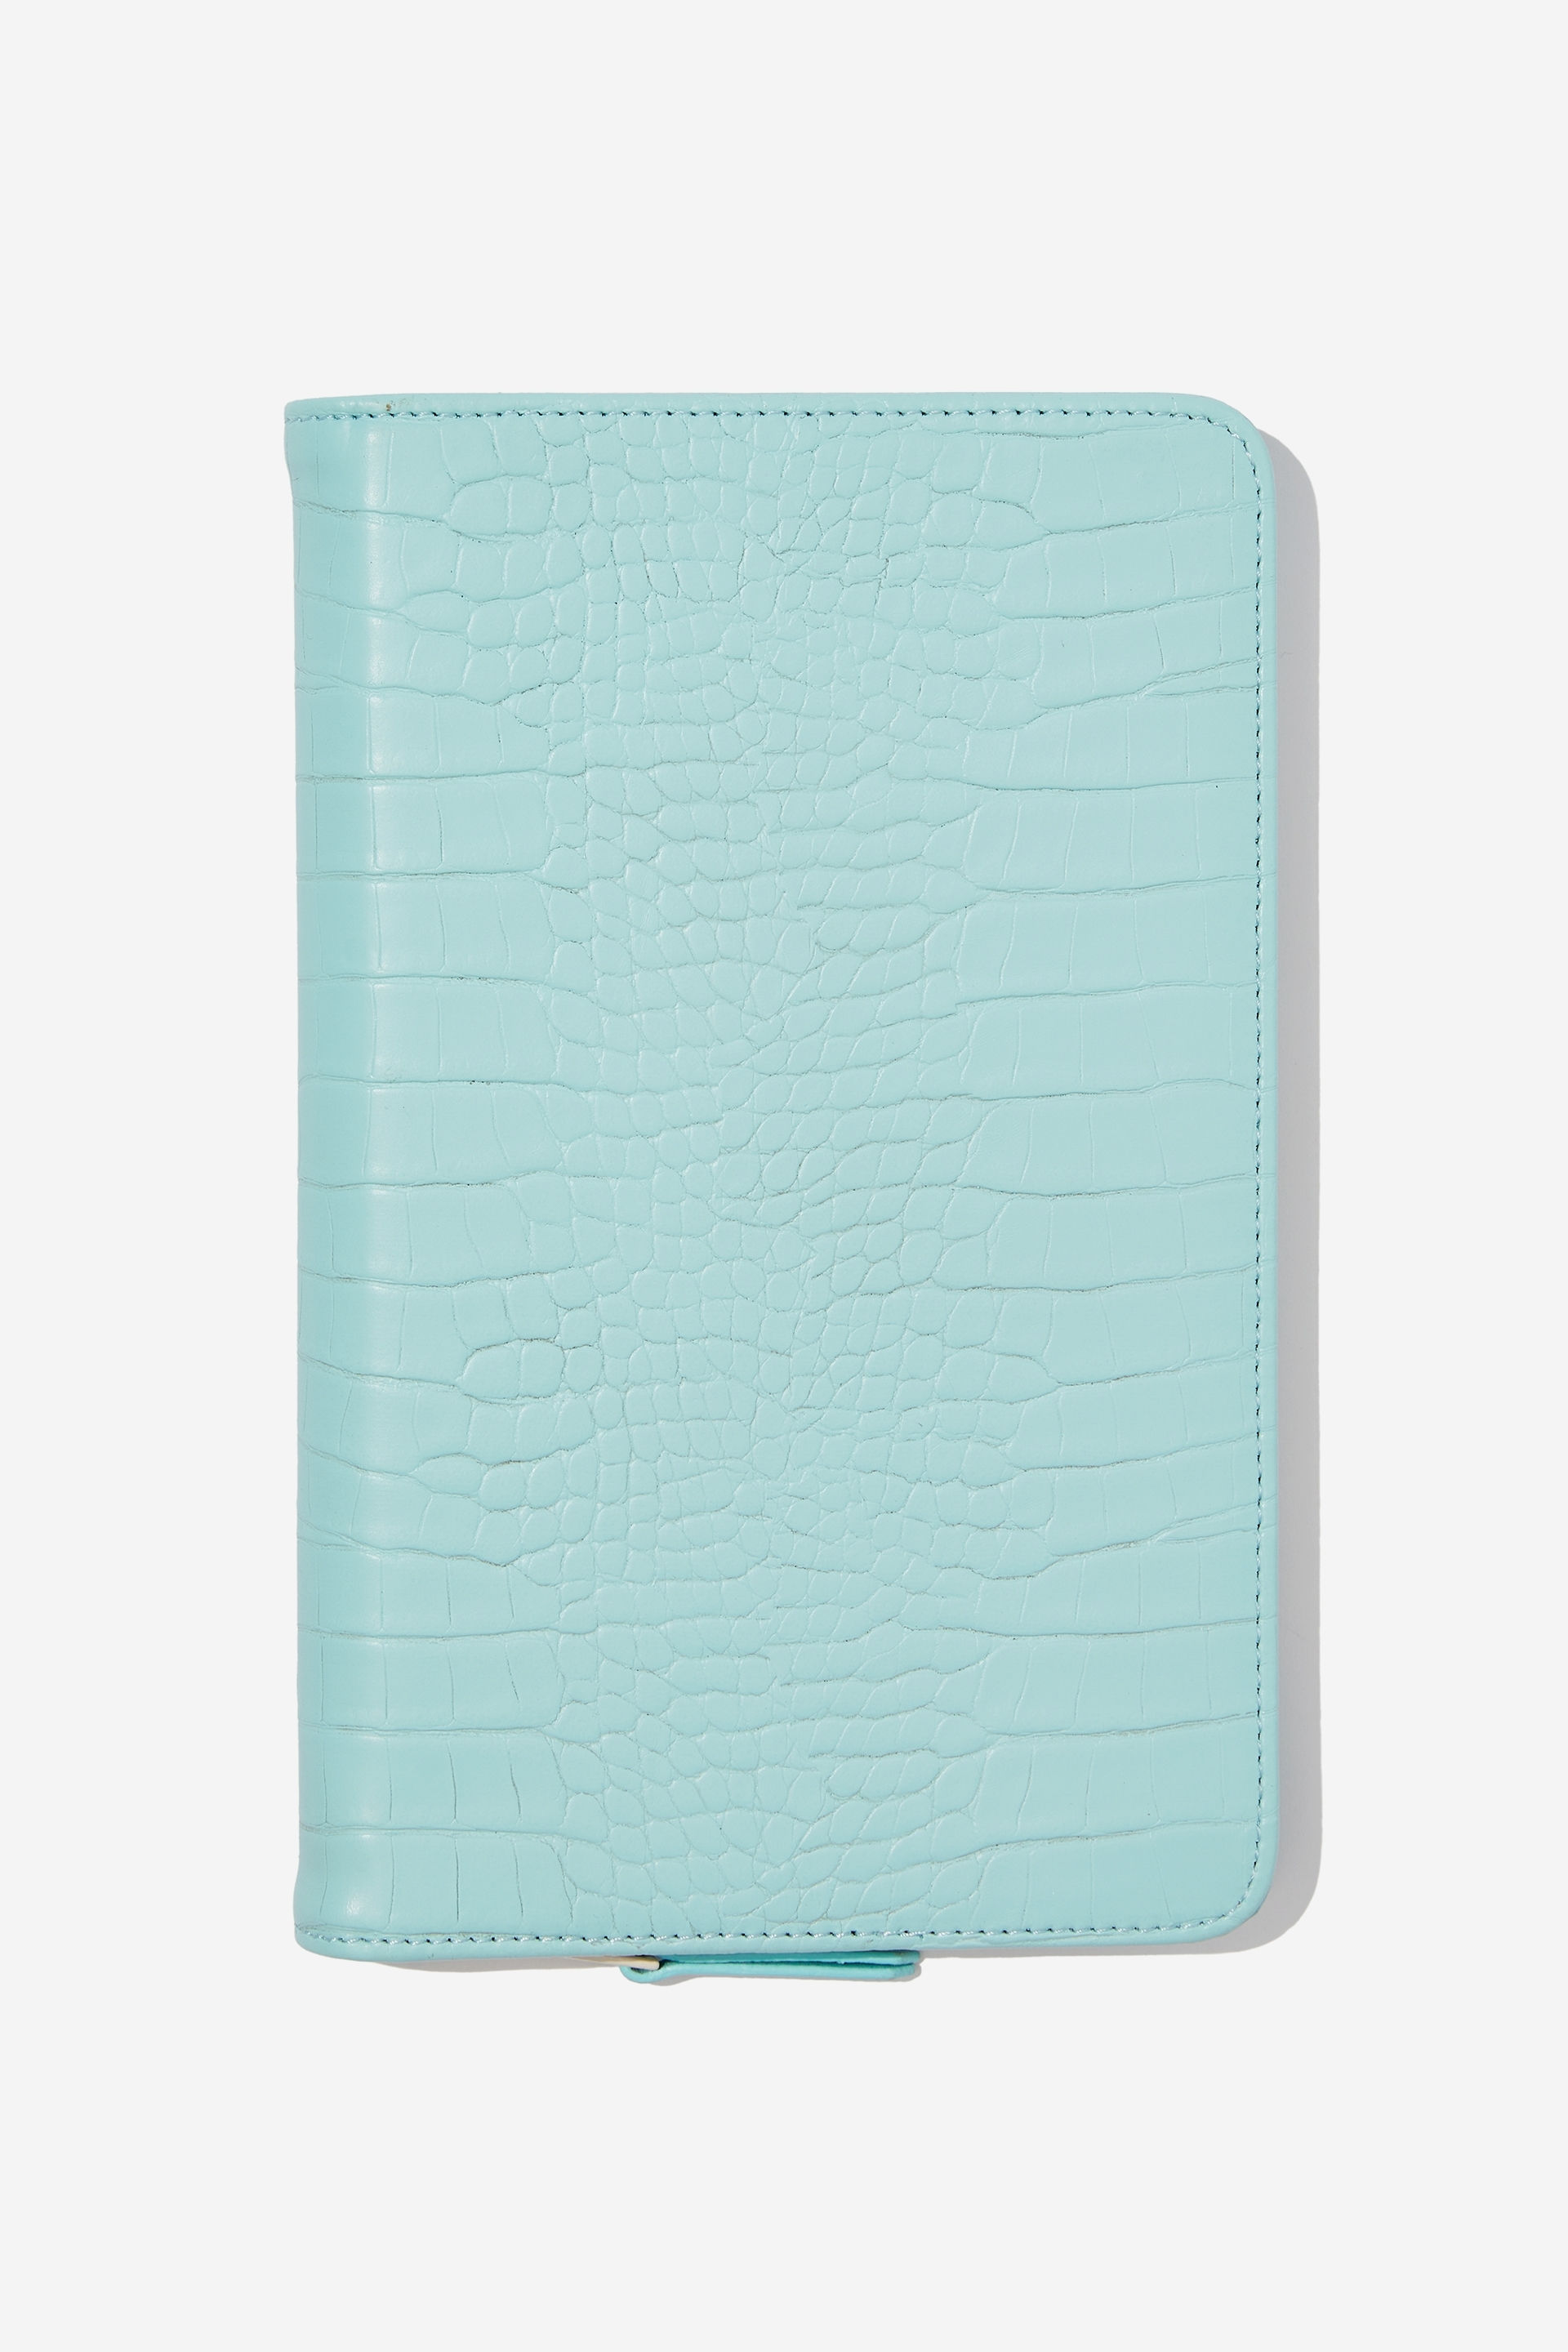 Typo - Off The Grid Travel Wallet - Minty skies textured